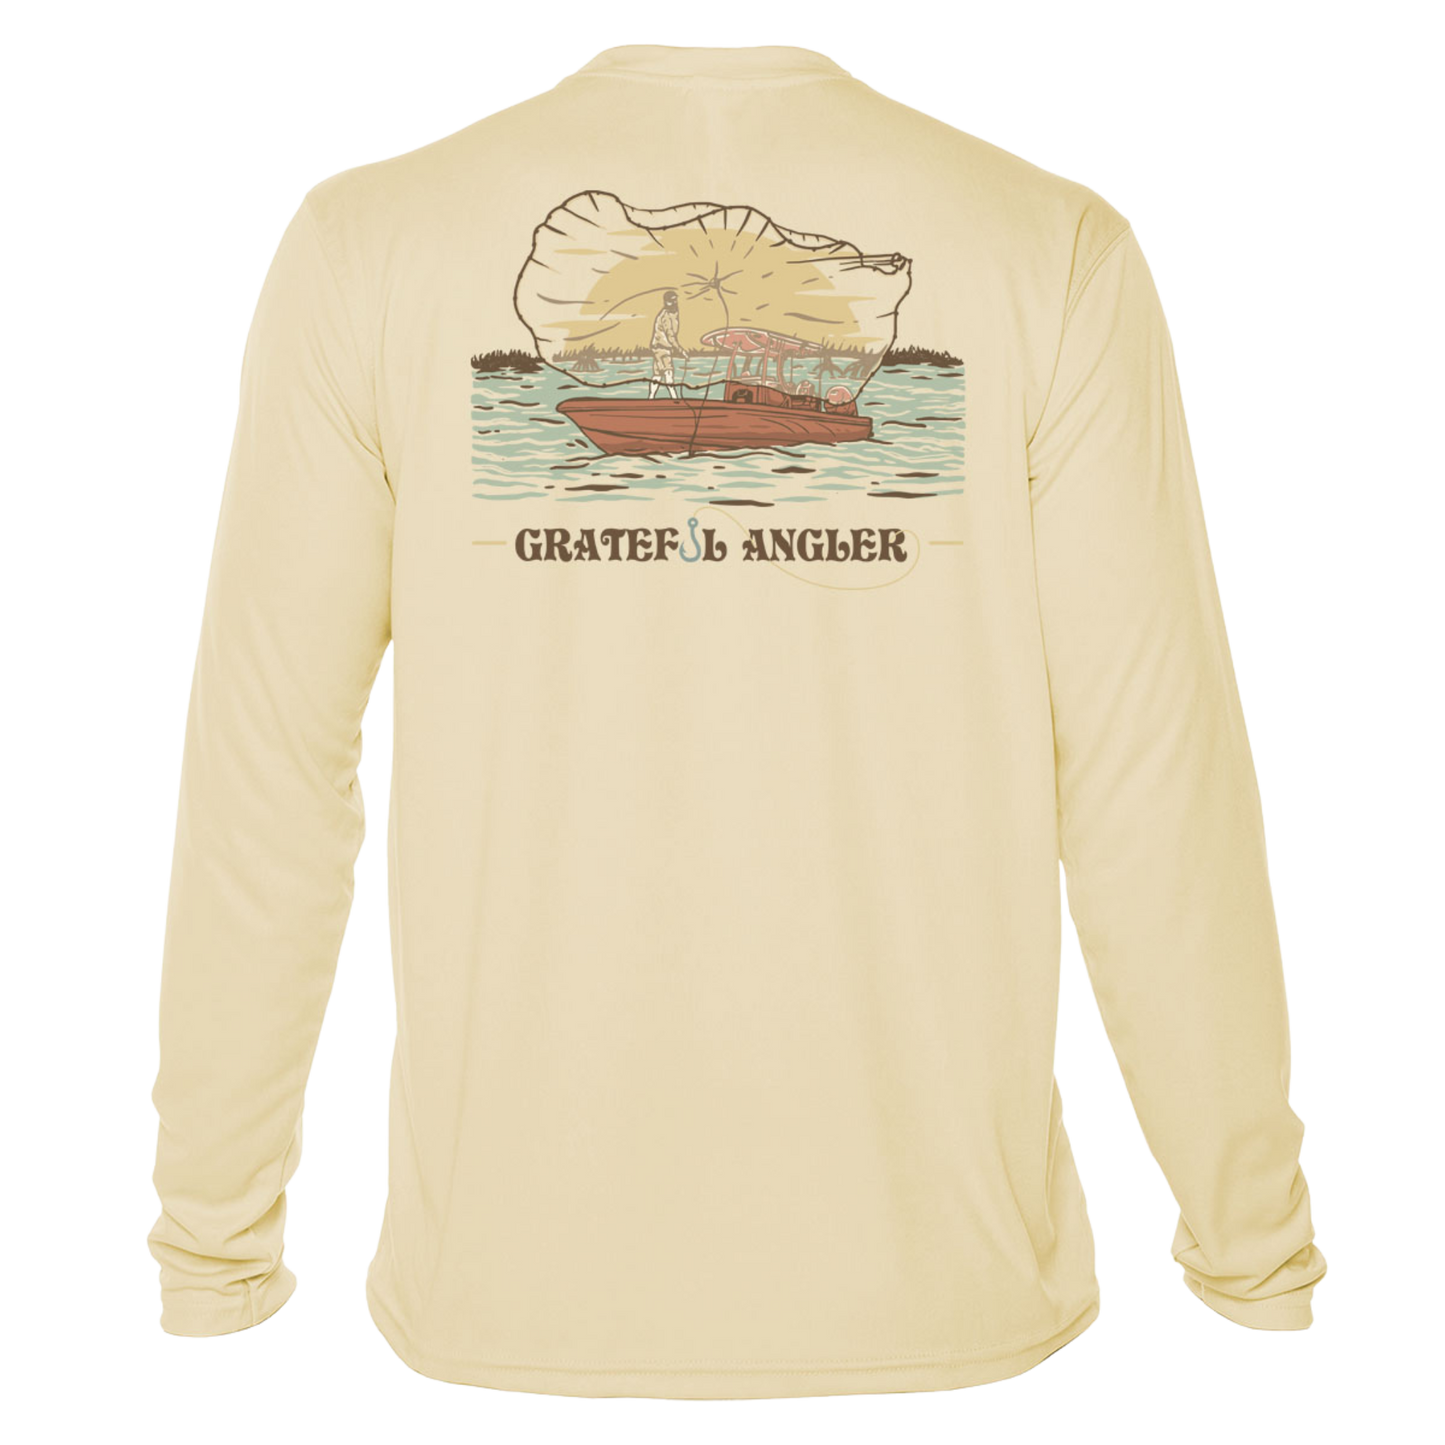 back of pale yellow Grateful Angler Tossing the Cast Net UV Shirt showing a person throwing the cast net over the side of a boat